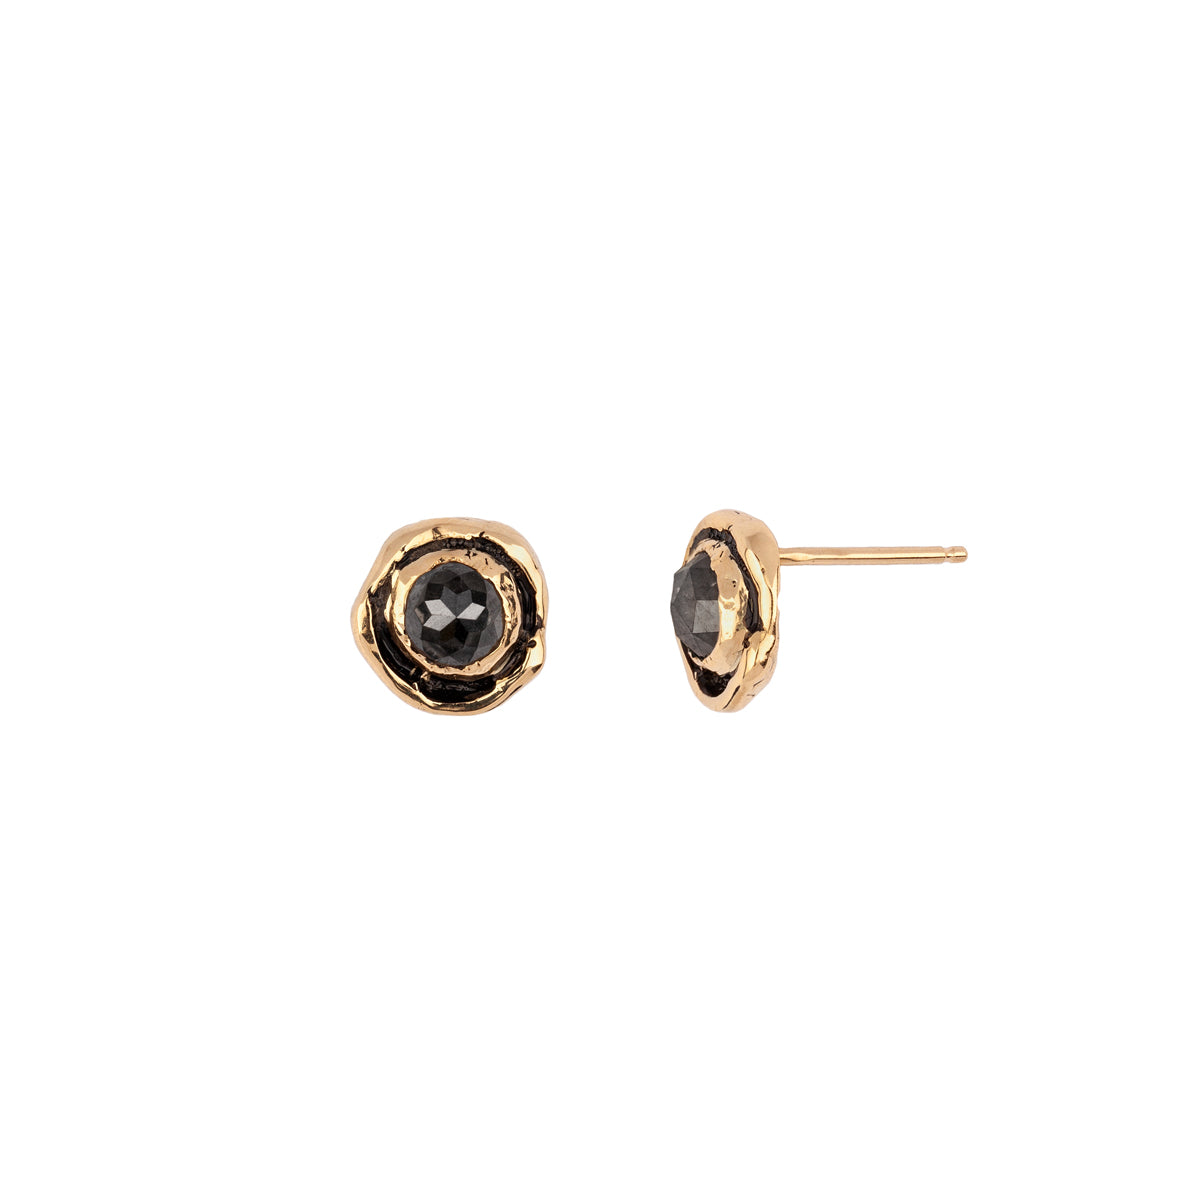 A set of 14k gold stud earrings featuring Charcoal Rustic Diamonds.